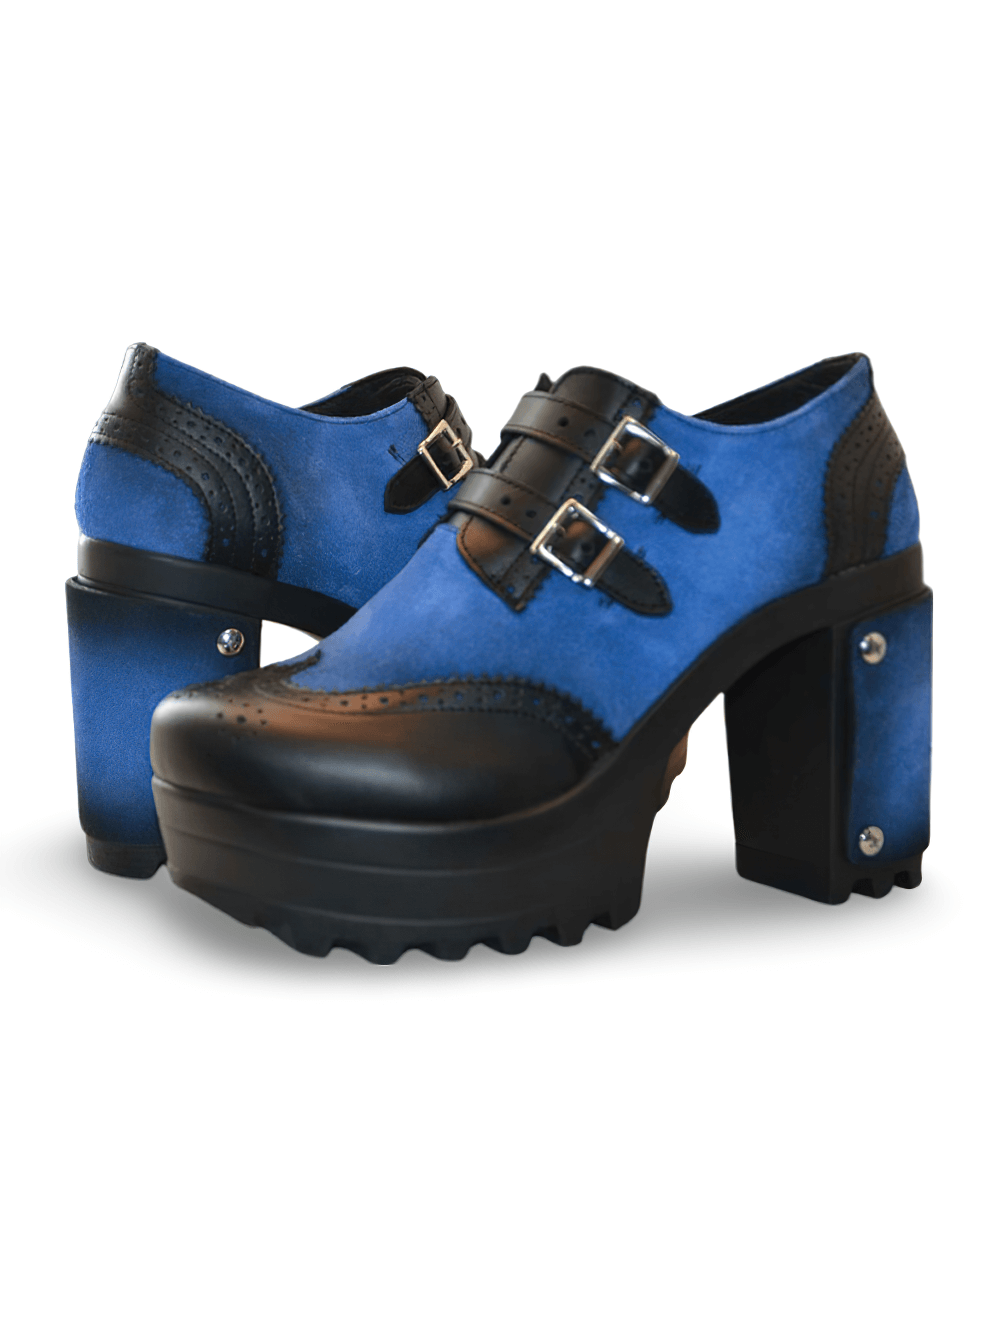 Blue And Black Buckled Suede Booties with Platform